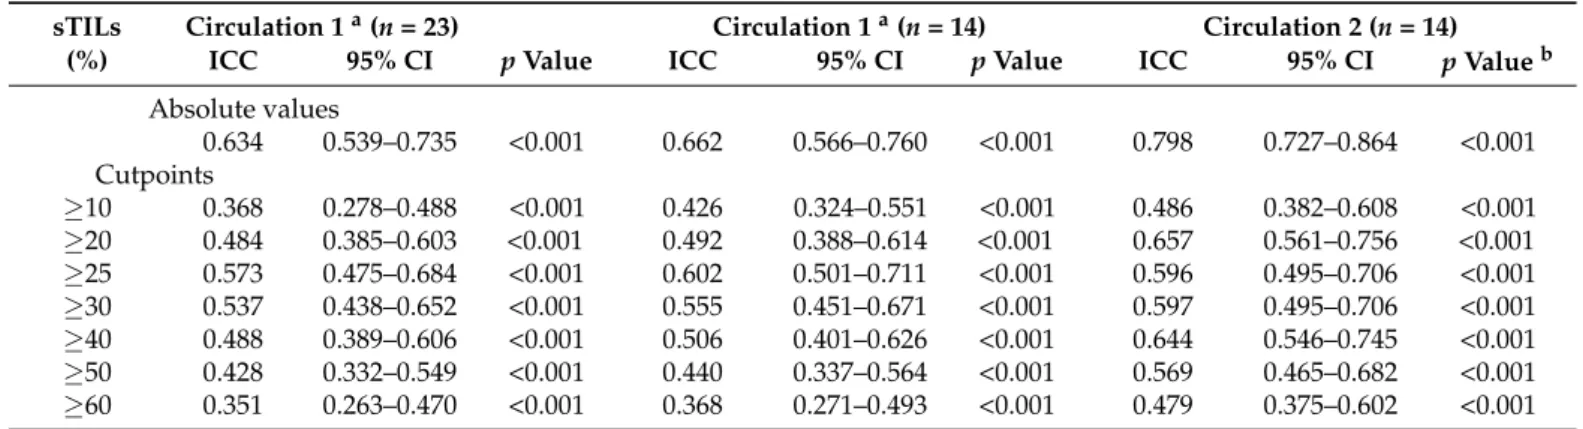 Table 1. Inter-observer agreement between pathologists scoring sTILs in circulation 1 and 2.